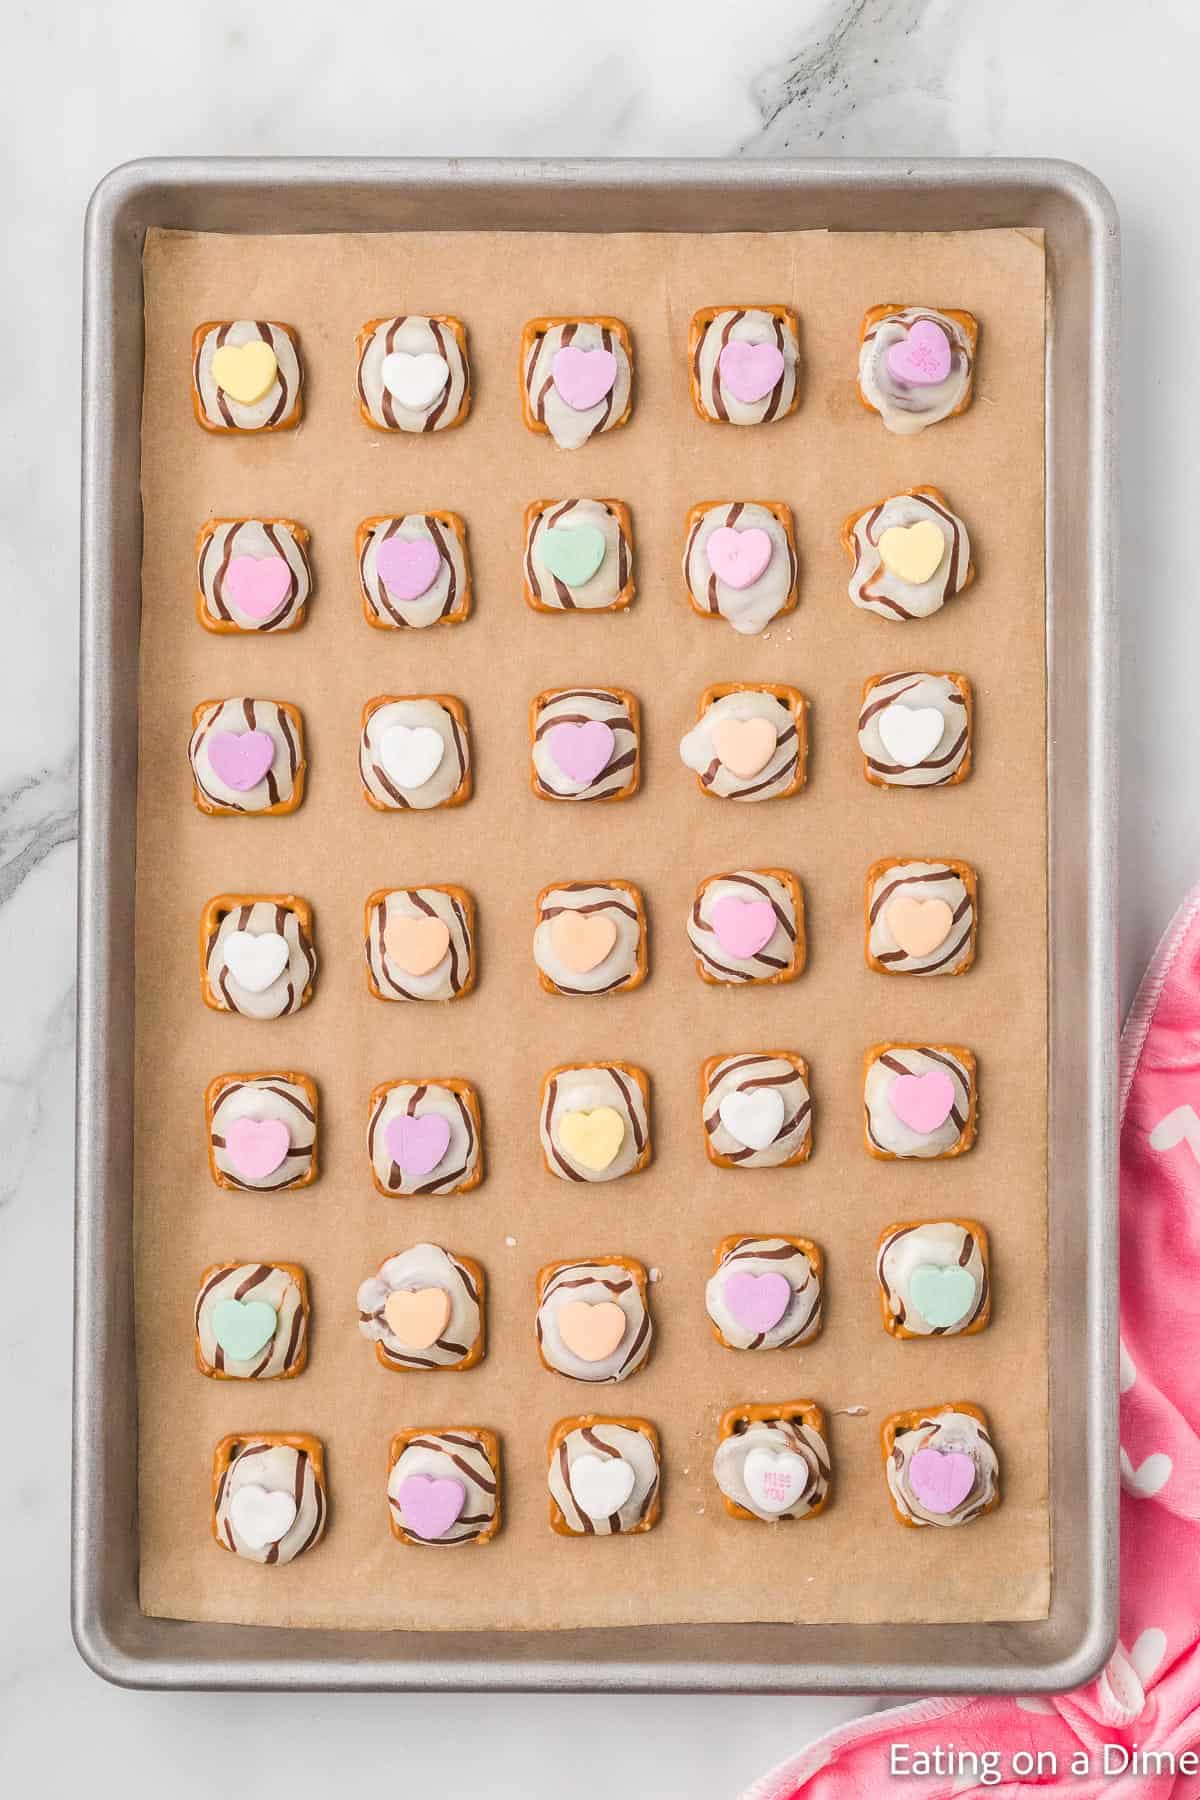 All the melted kiss with the candied hearts